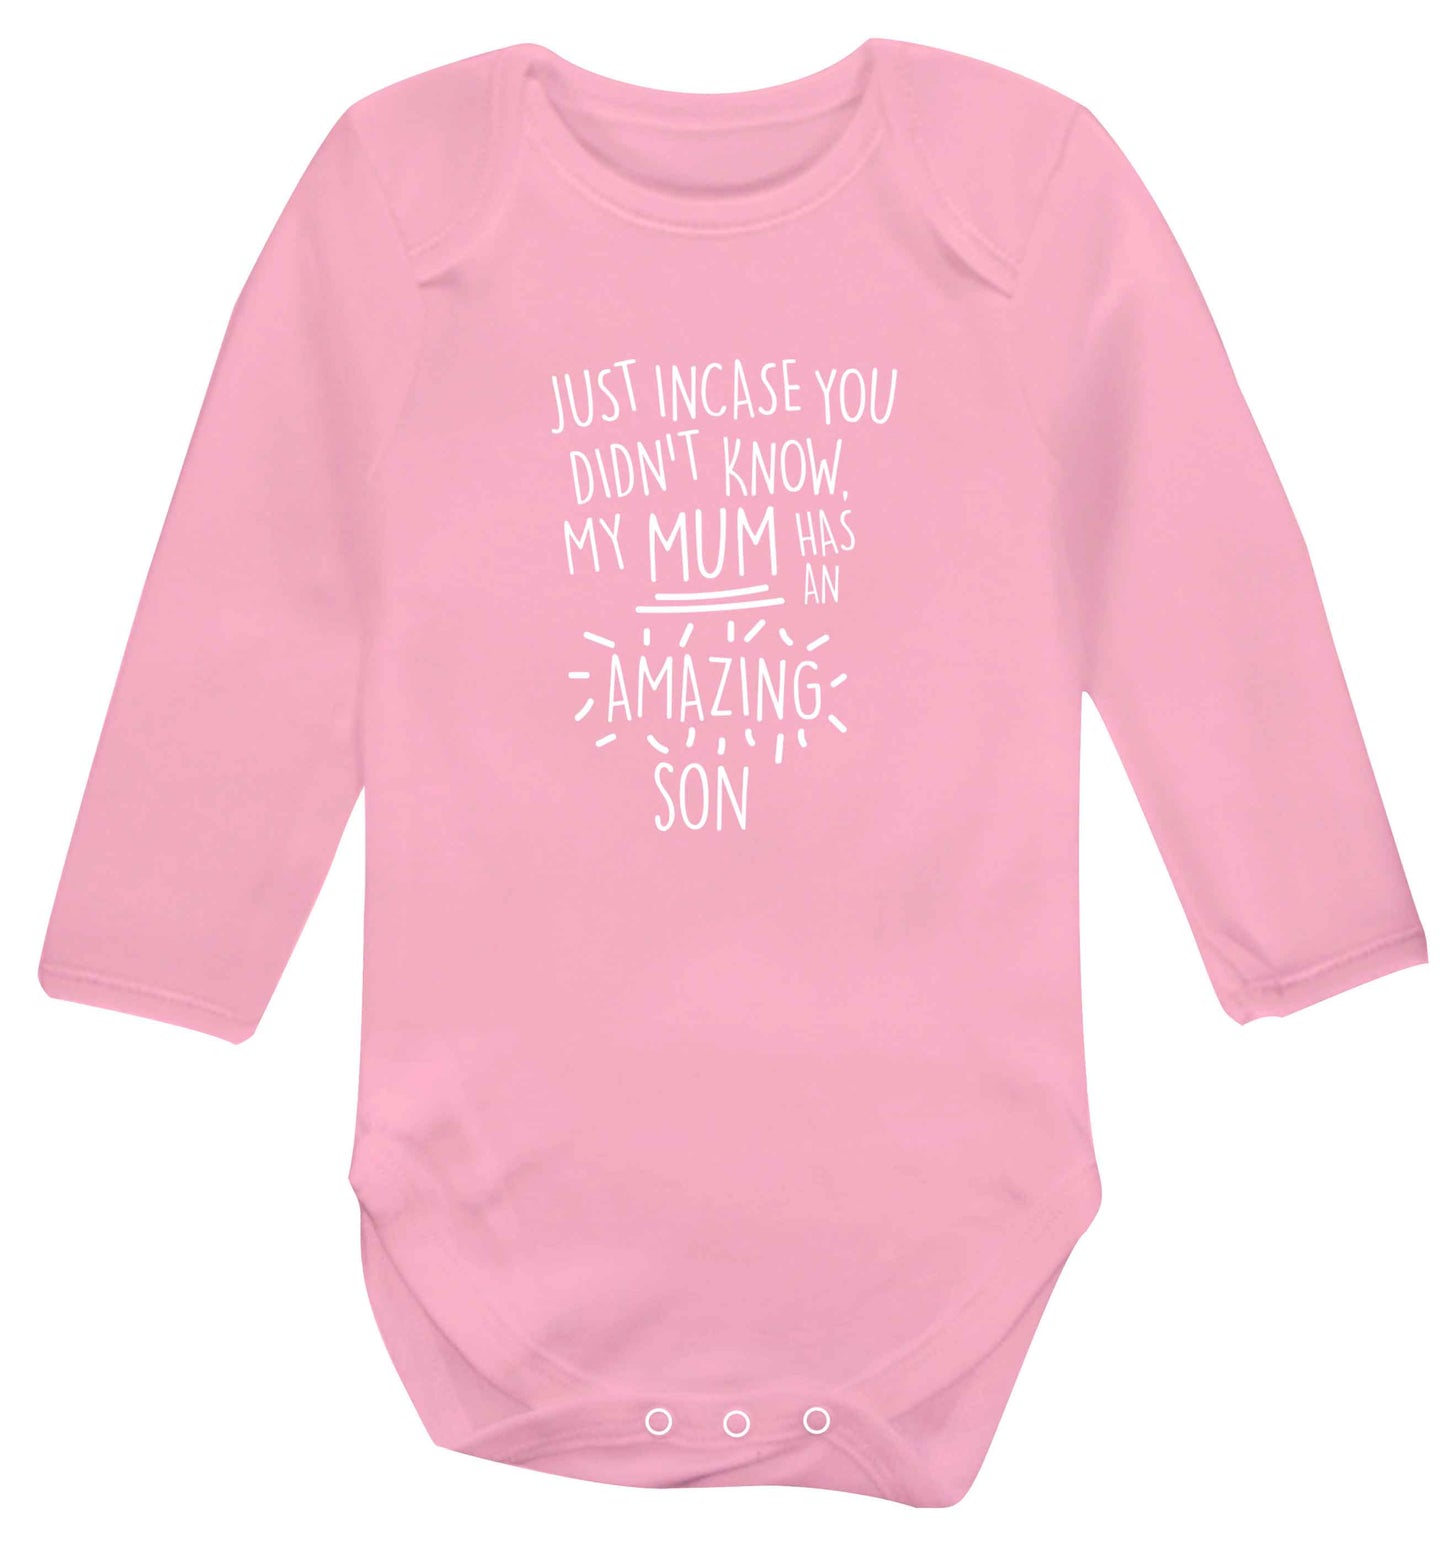 Just incase you didn't know my mum has an amazing son baby vest long sleeved pale pink 6-12 months